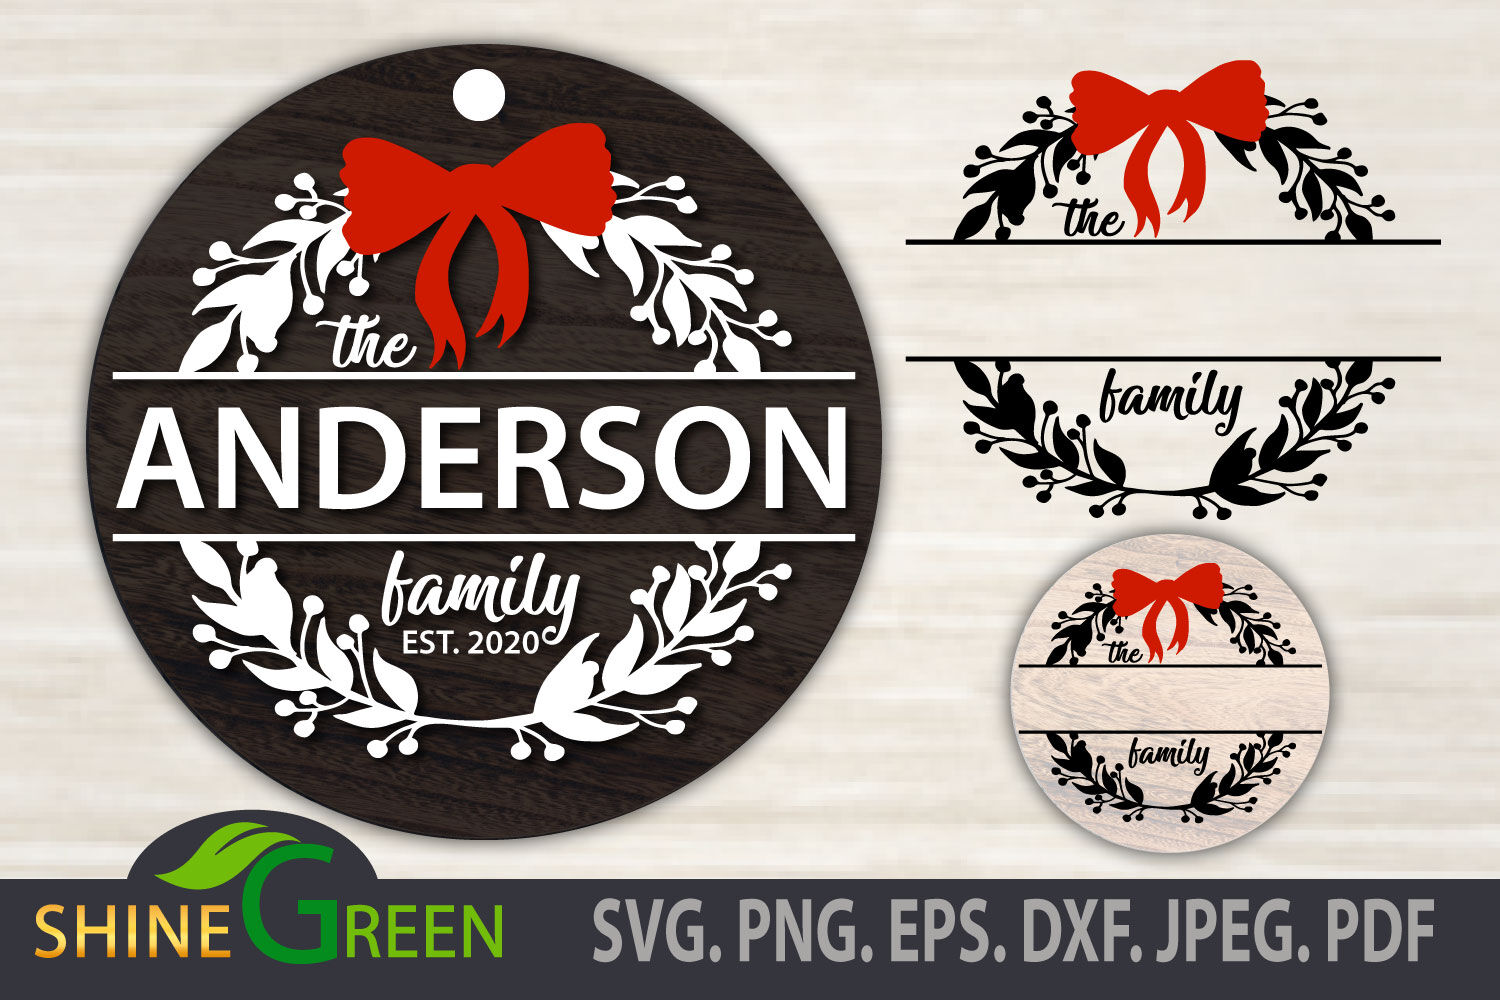 Family Monogram SVG - Christmas Floral Frame Round Sign By